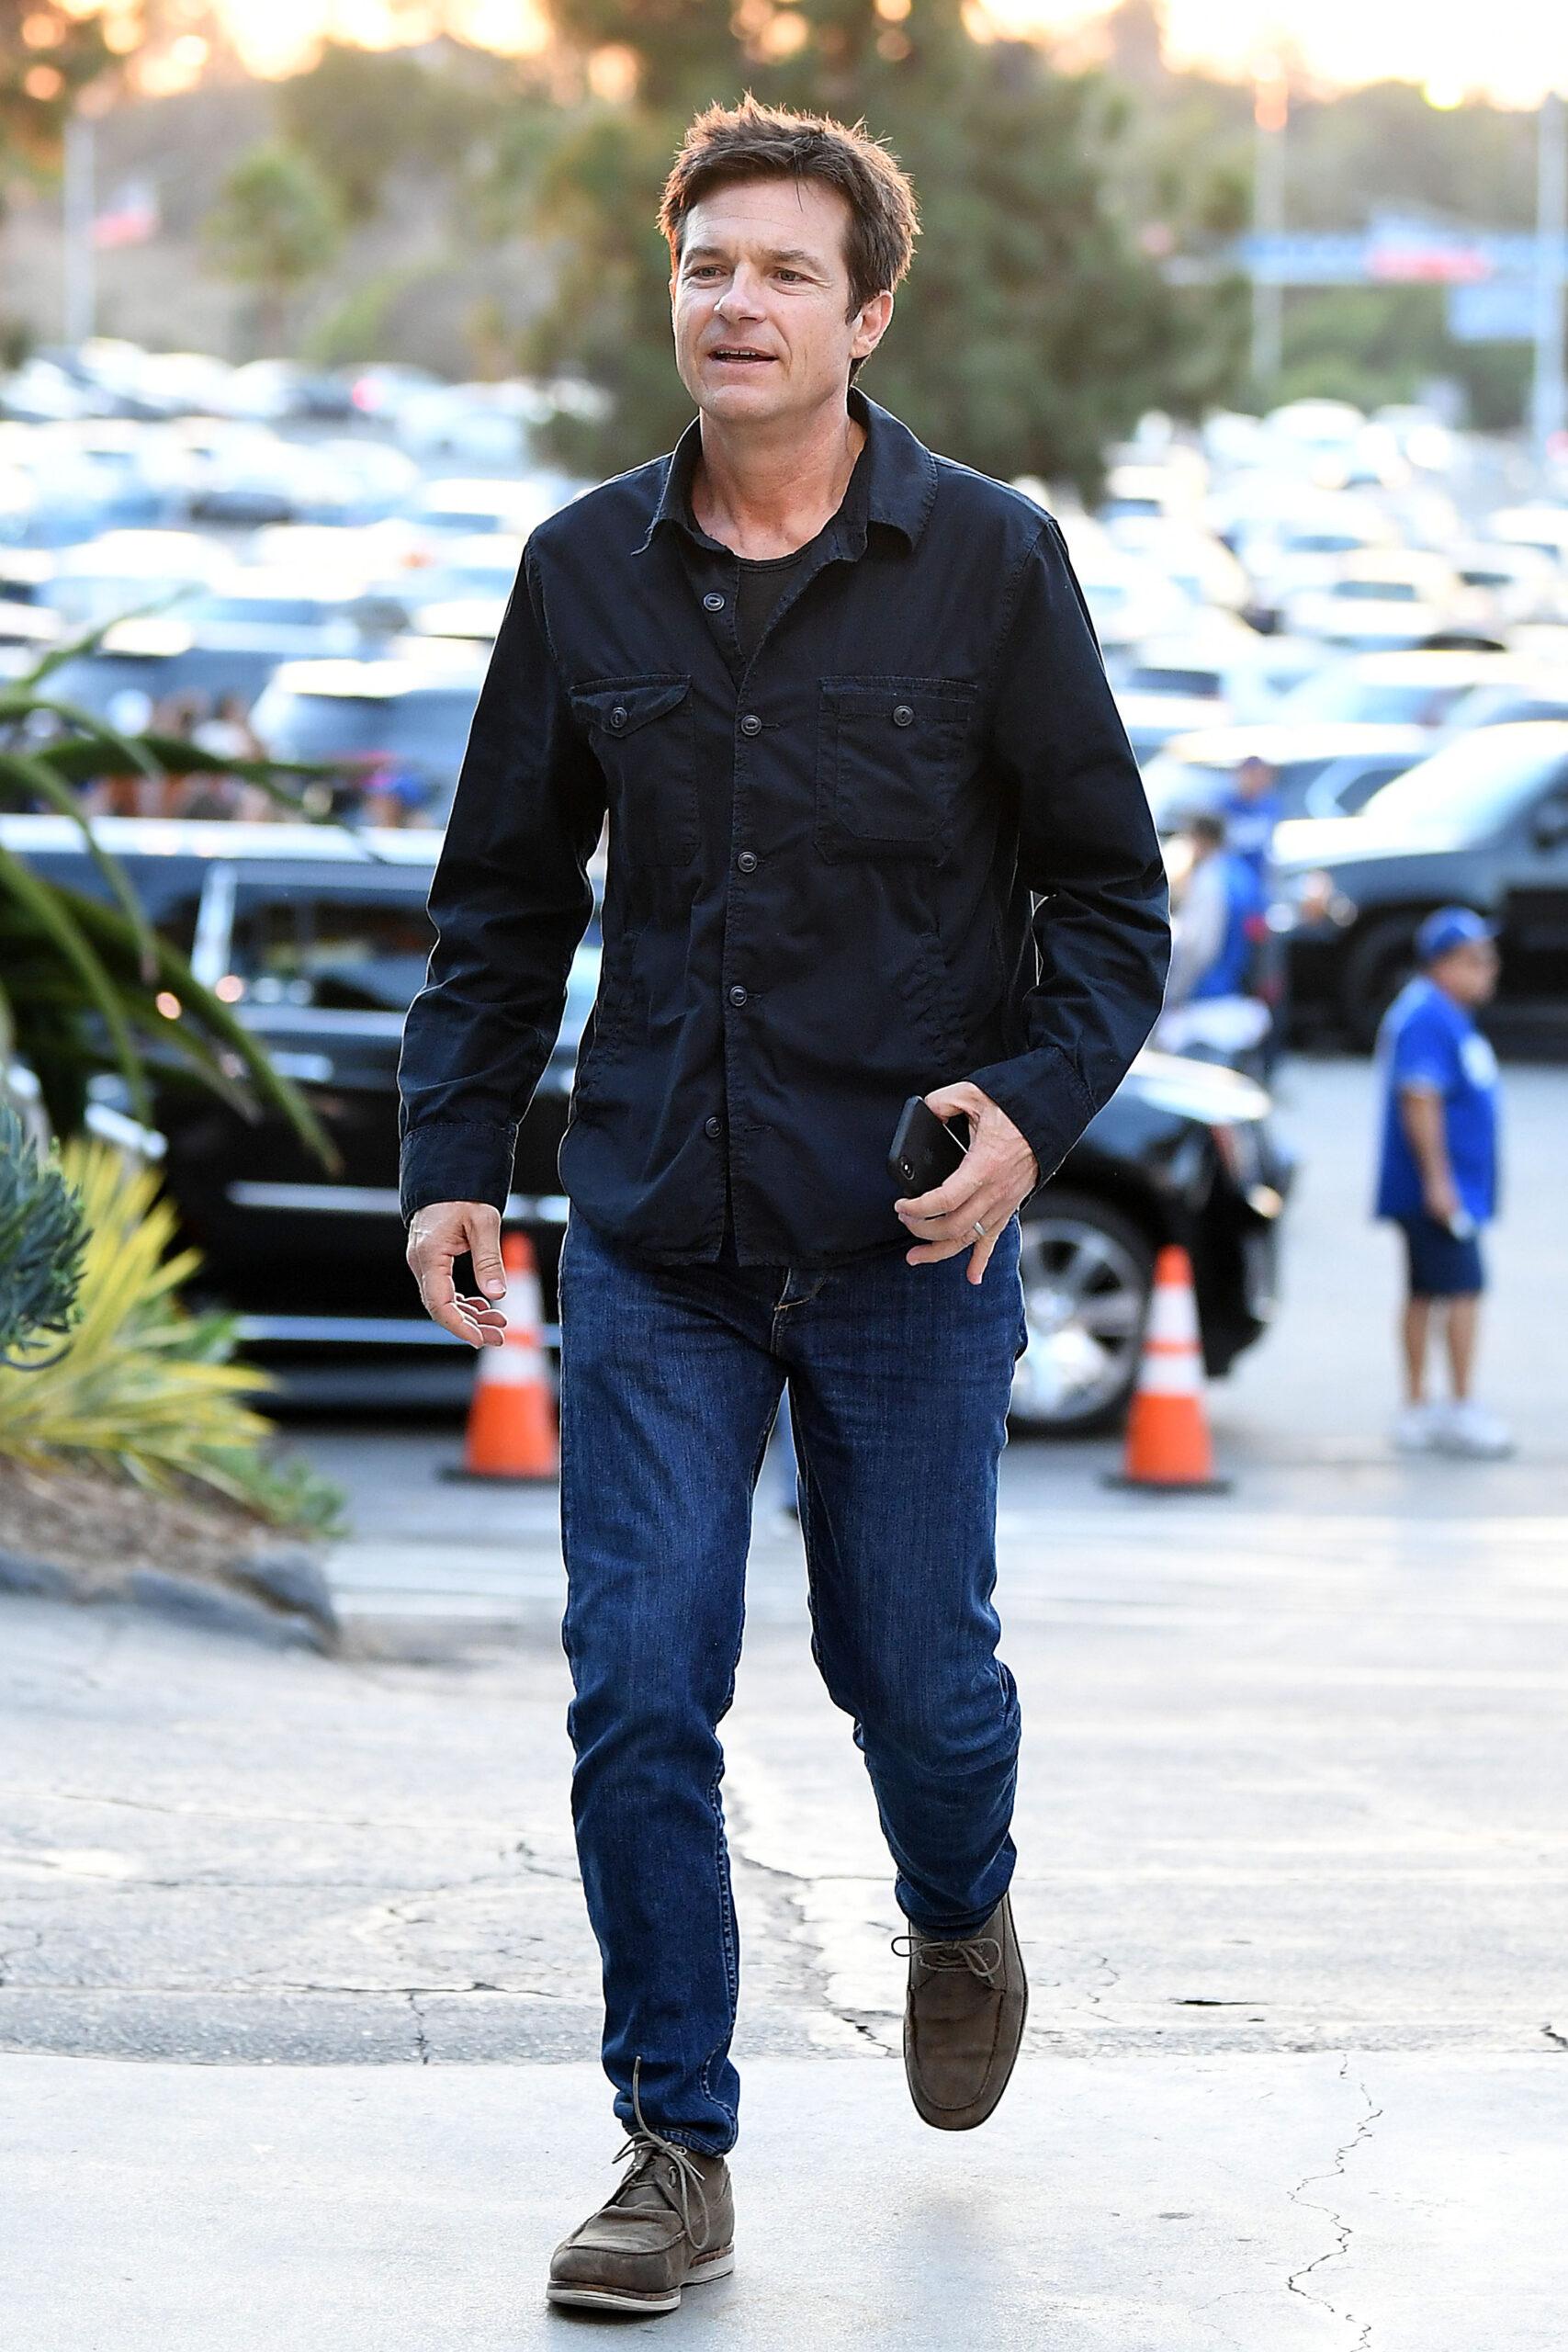 Jason Bateman goes to a Dodgers baseball playoff game against the Braves